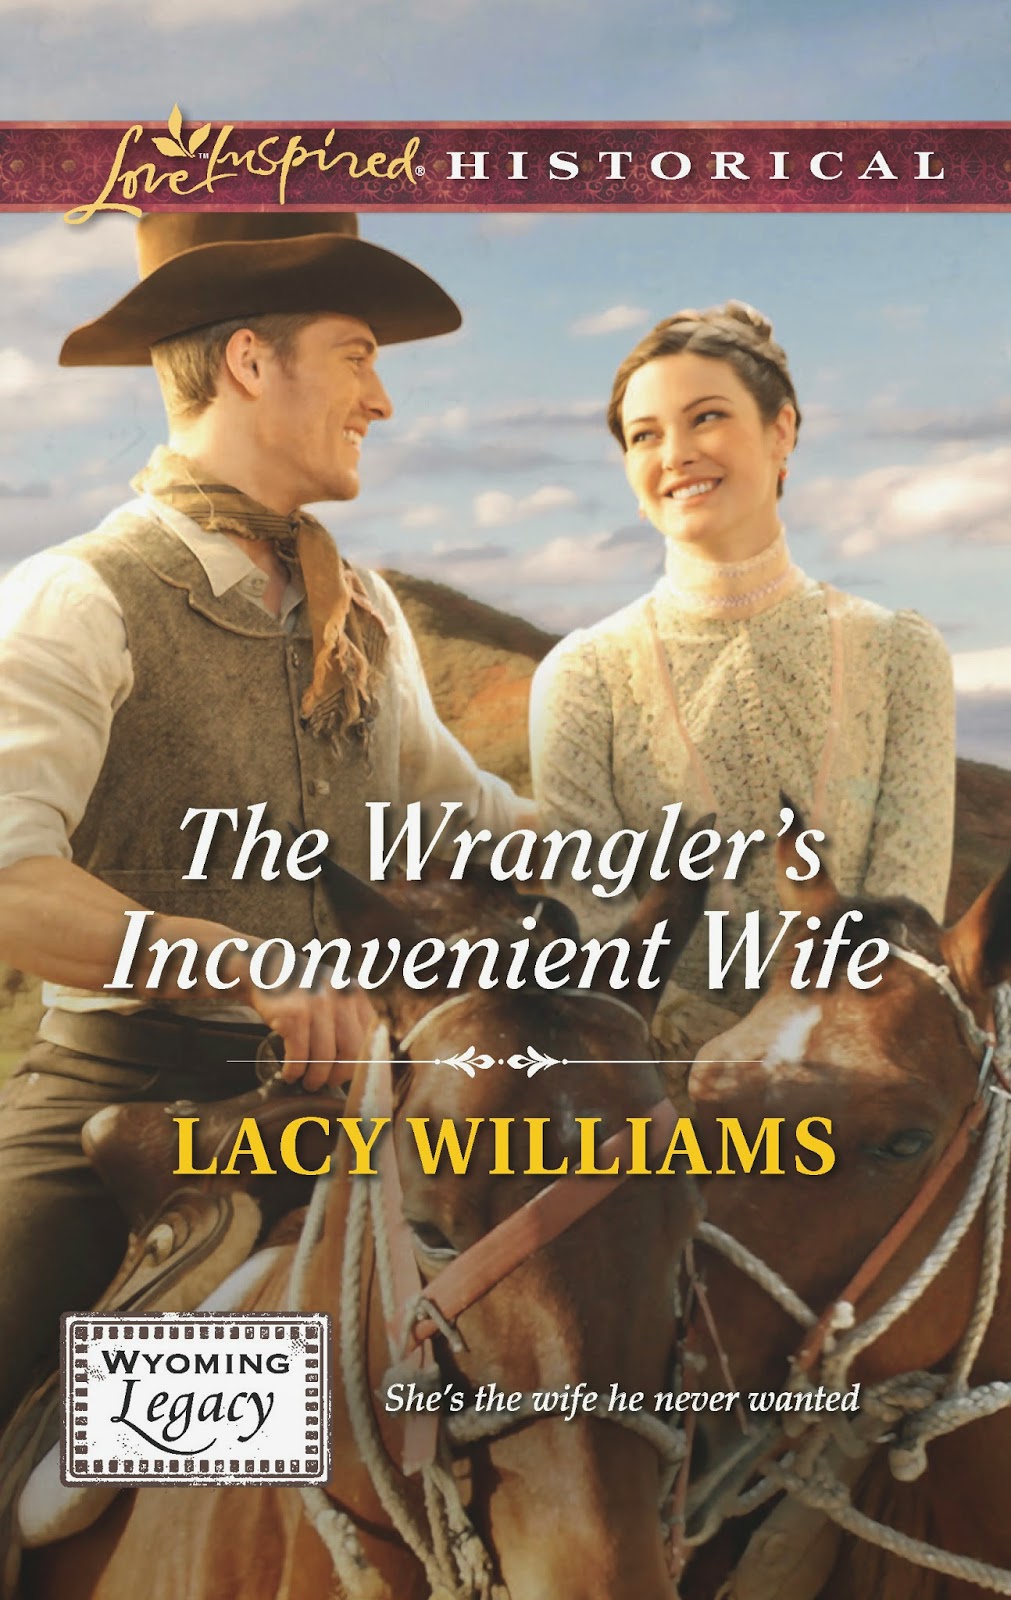 The Wrangler's Inconvenient Wife